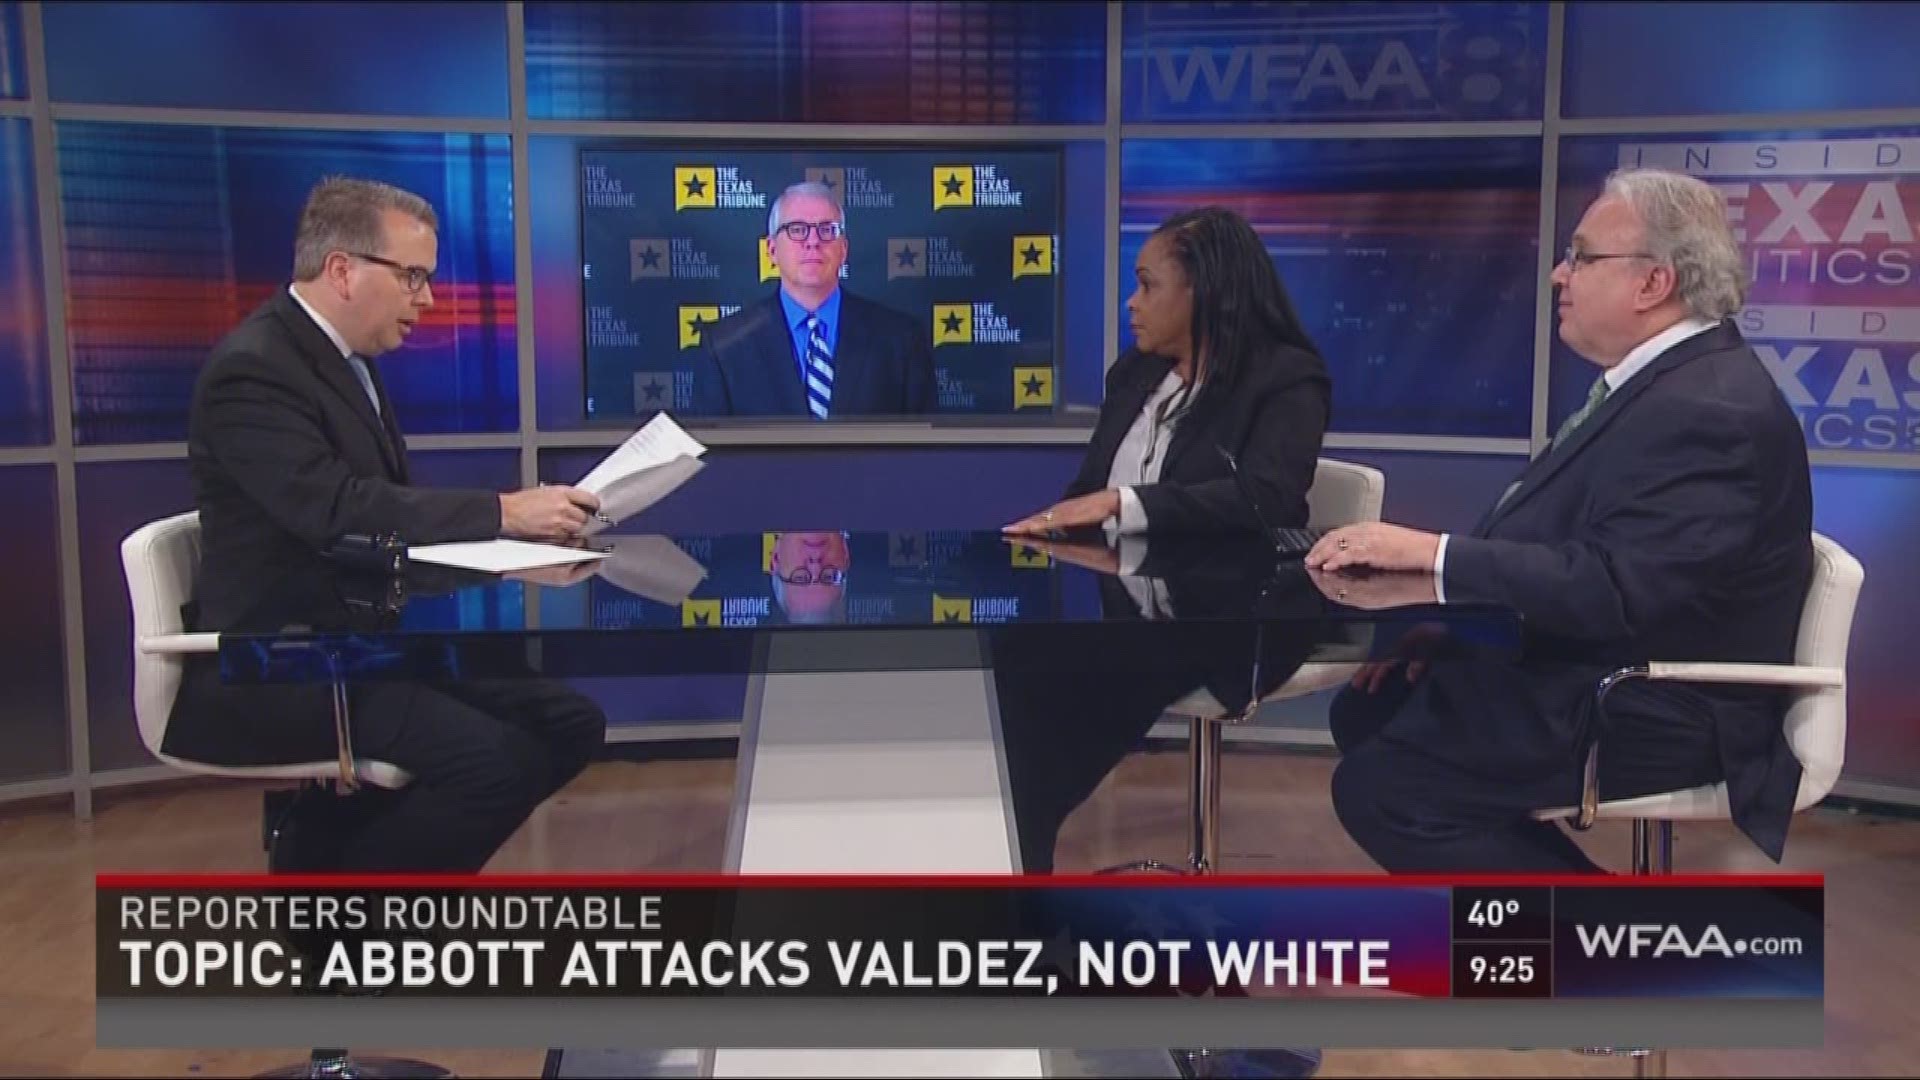 Reporters Roundtable puts the headlines in perspective each week. Bud and Ross returned along with Berna Dean Steptoe, WFAA's political producer. They analyzed Governor Greg Abbott's recent attack on Lupe Valdez, Senator Ted Cruz's image campaign, and dis